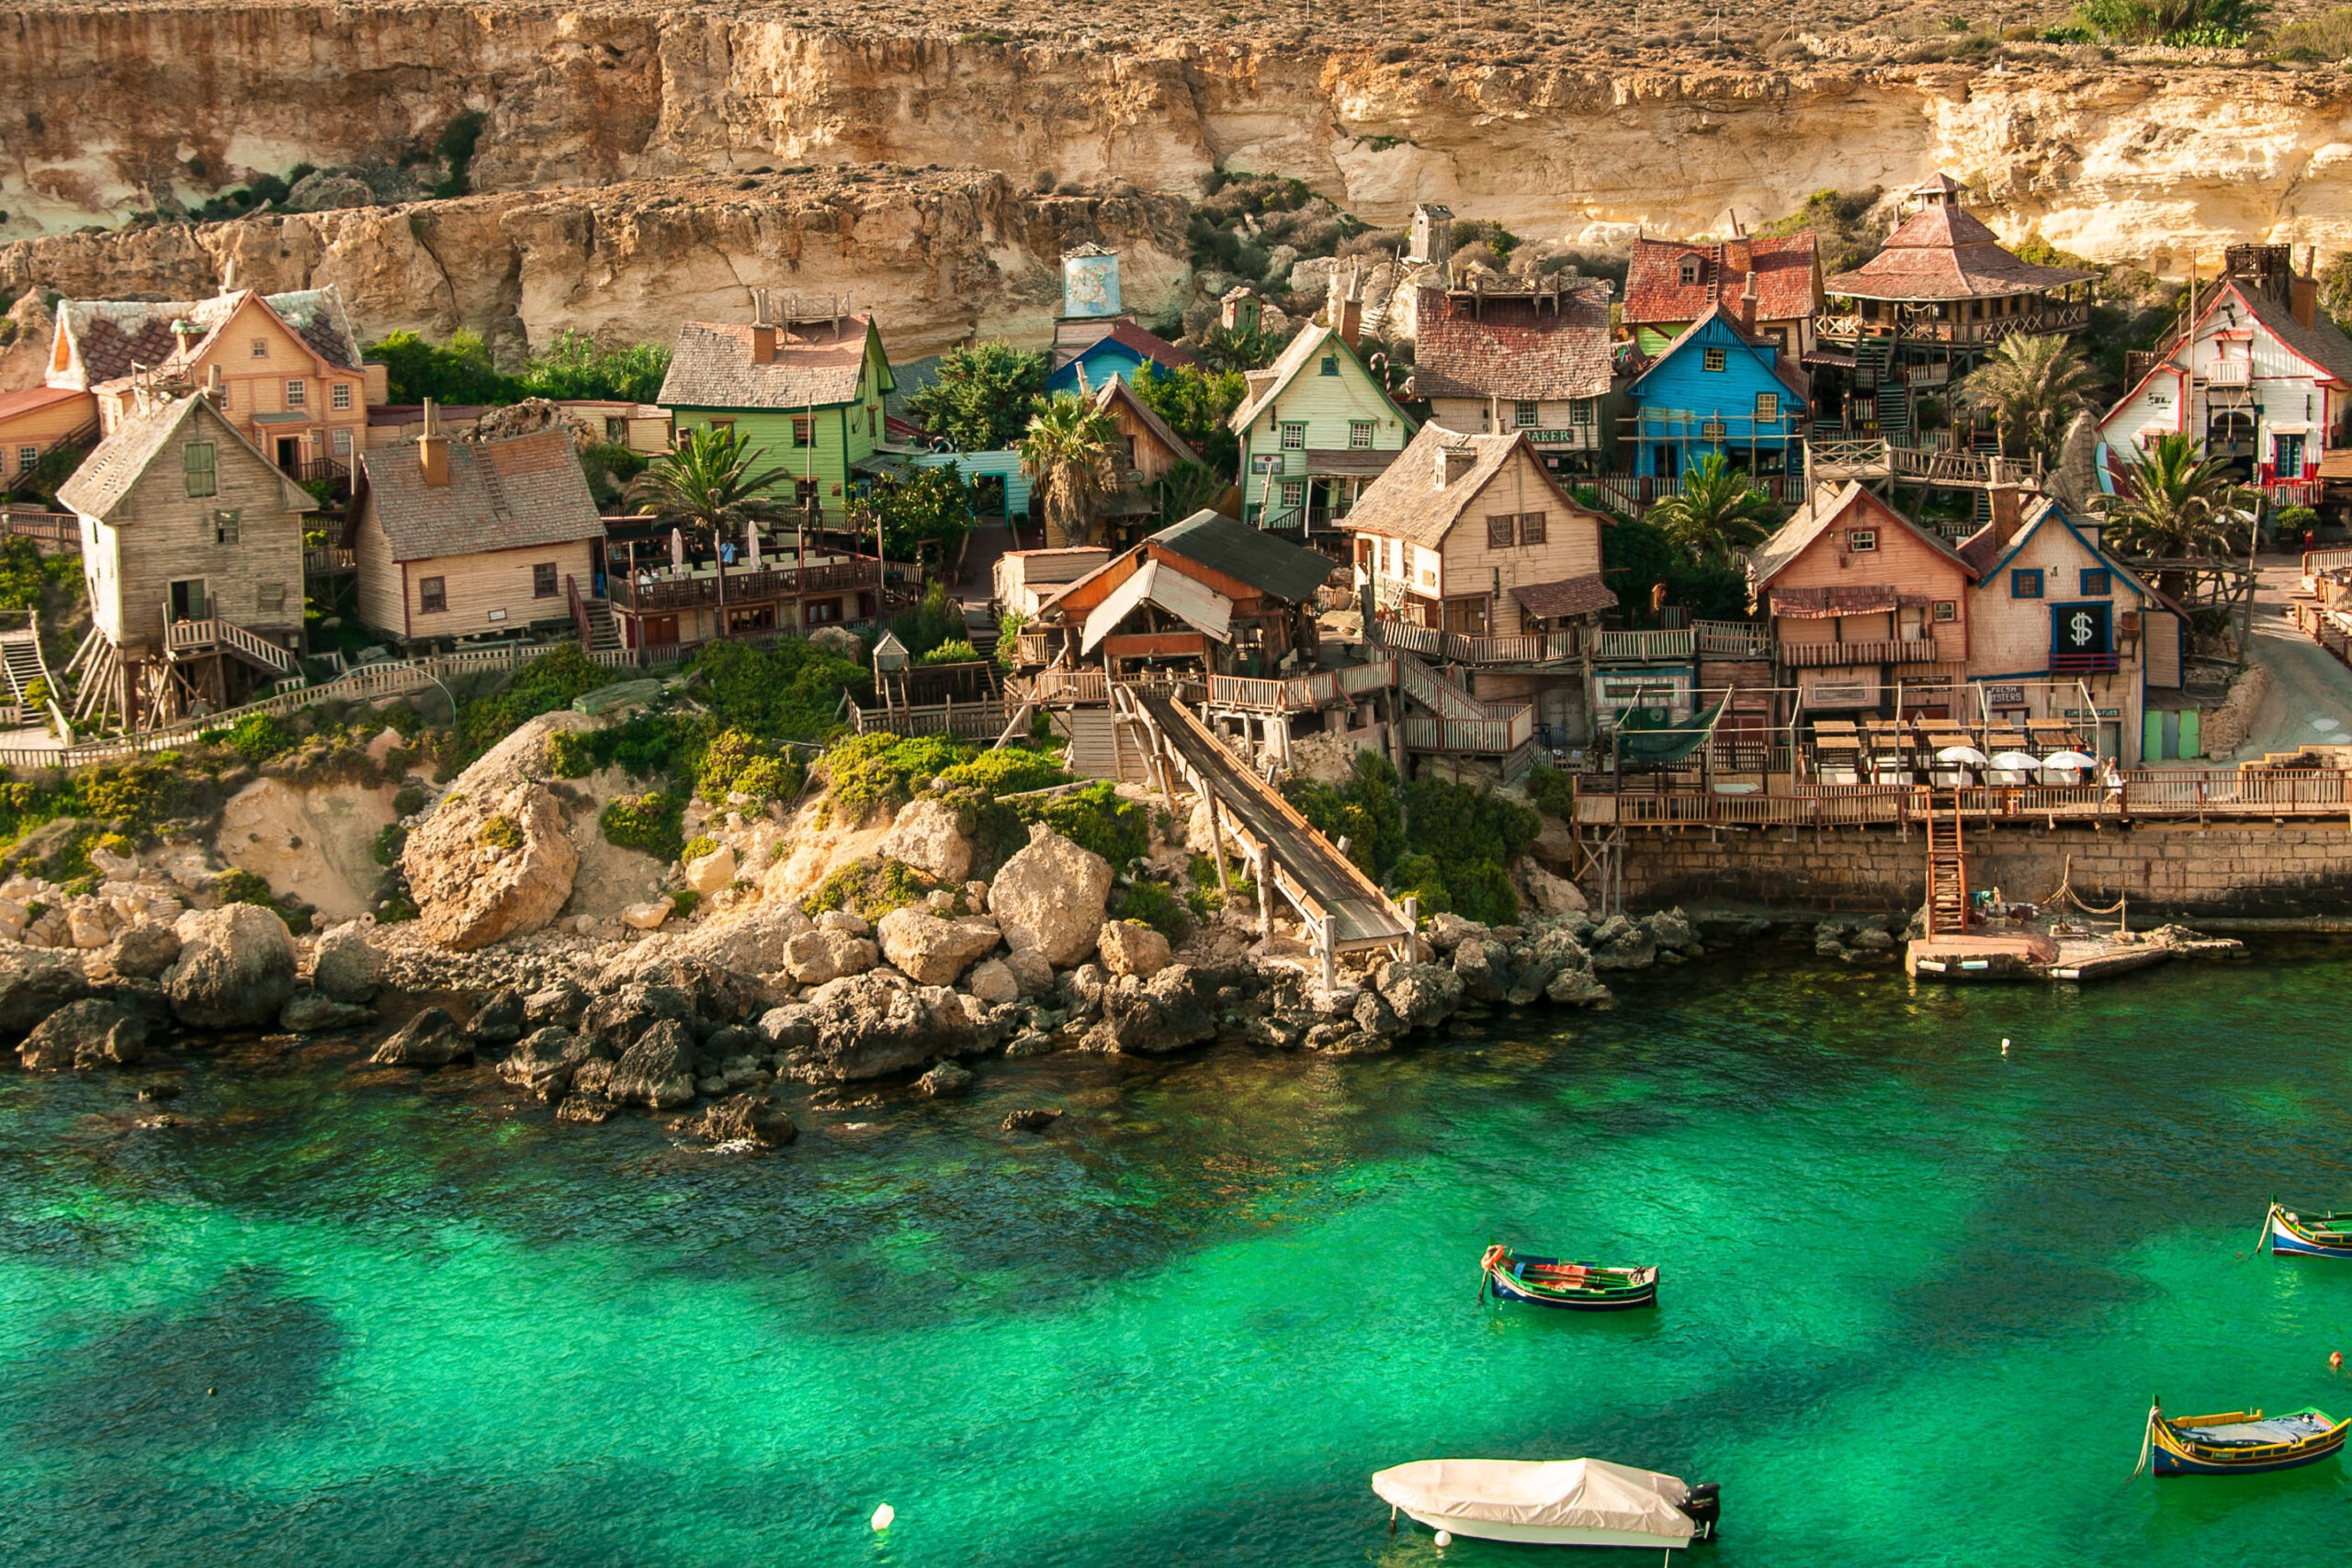 Popeye Village Park and traditional luzzu boats seen from Popeye Village Viewpoint in Malta